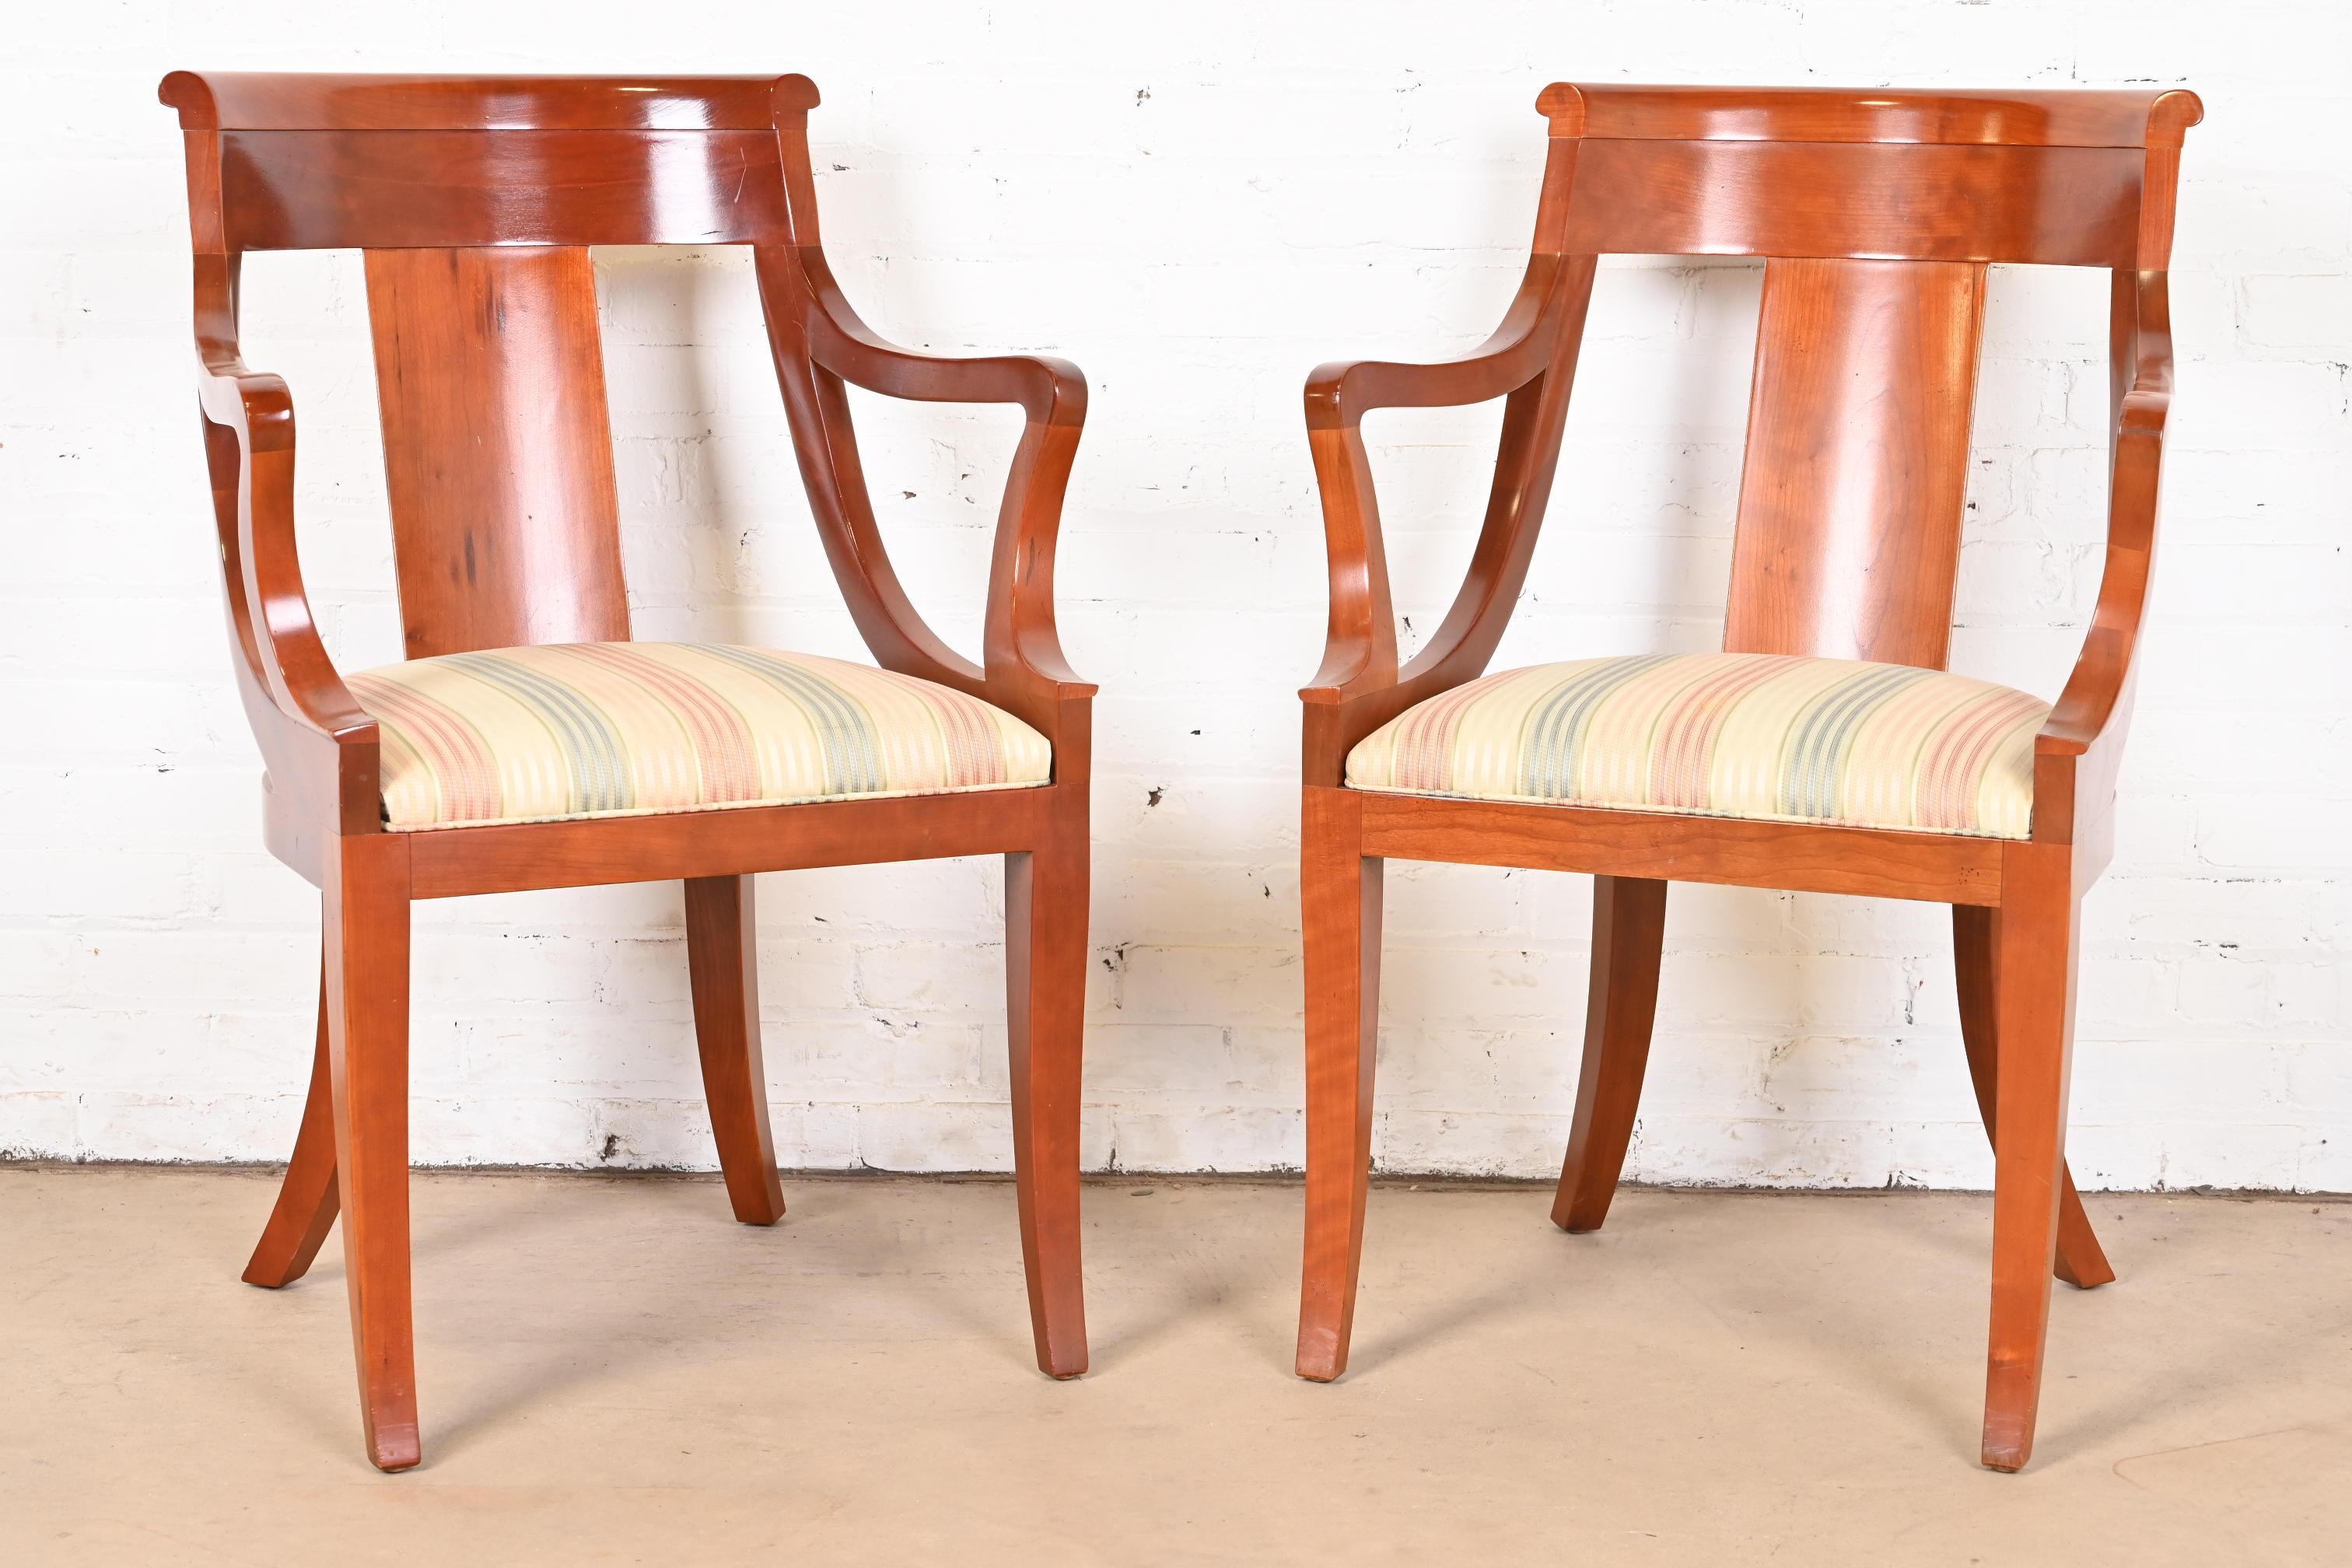 An outstanding pair of Regency style armchairs or dining captain chairs

By Baker Furniture

USA, Circa 1980s

Solid cherry wood frames, with upholstered seats.

Measures: 23.25